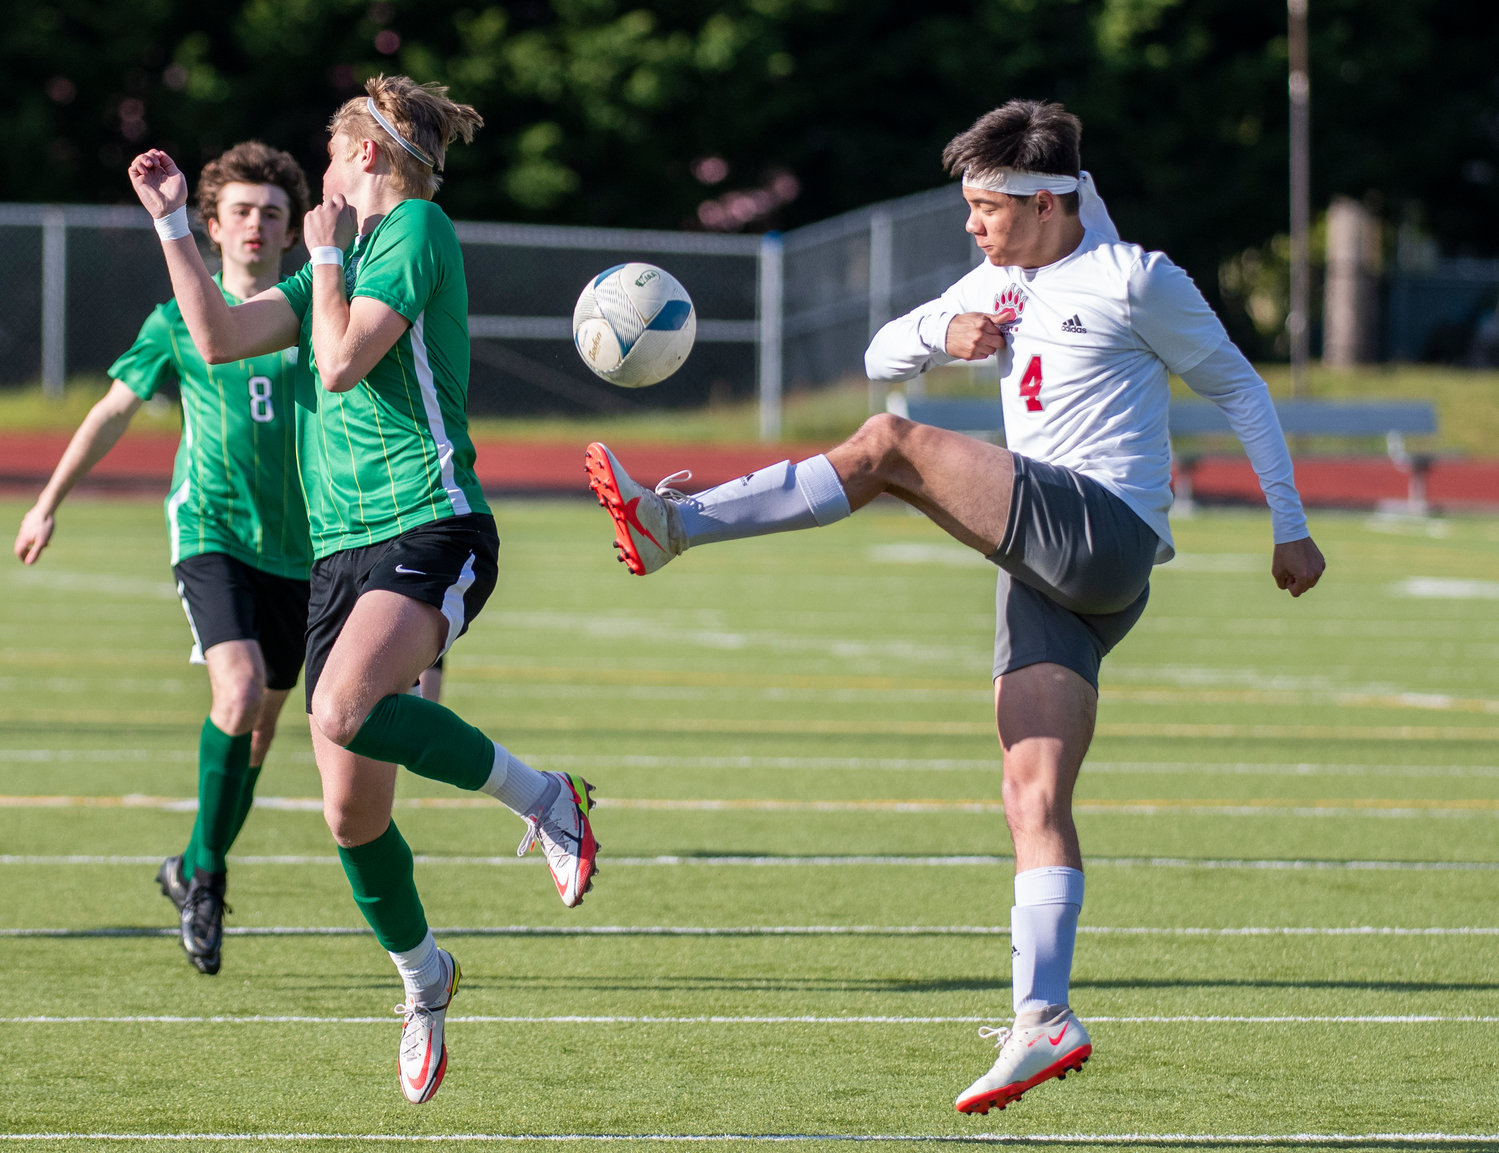 W.F. West's Cameron Kunz (4) boots the ball during the district semifinals against Tumwater on May 12.